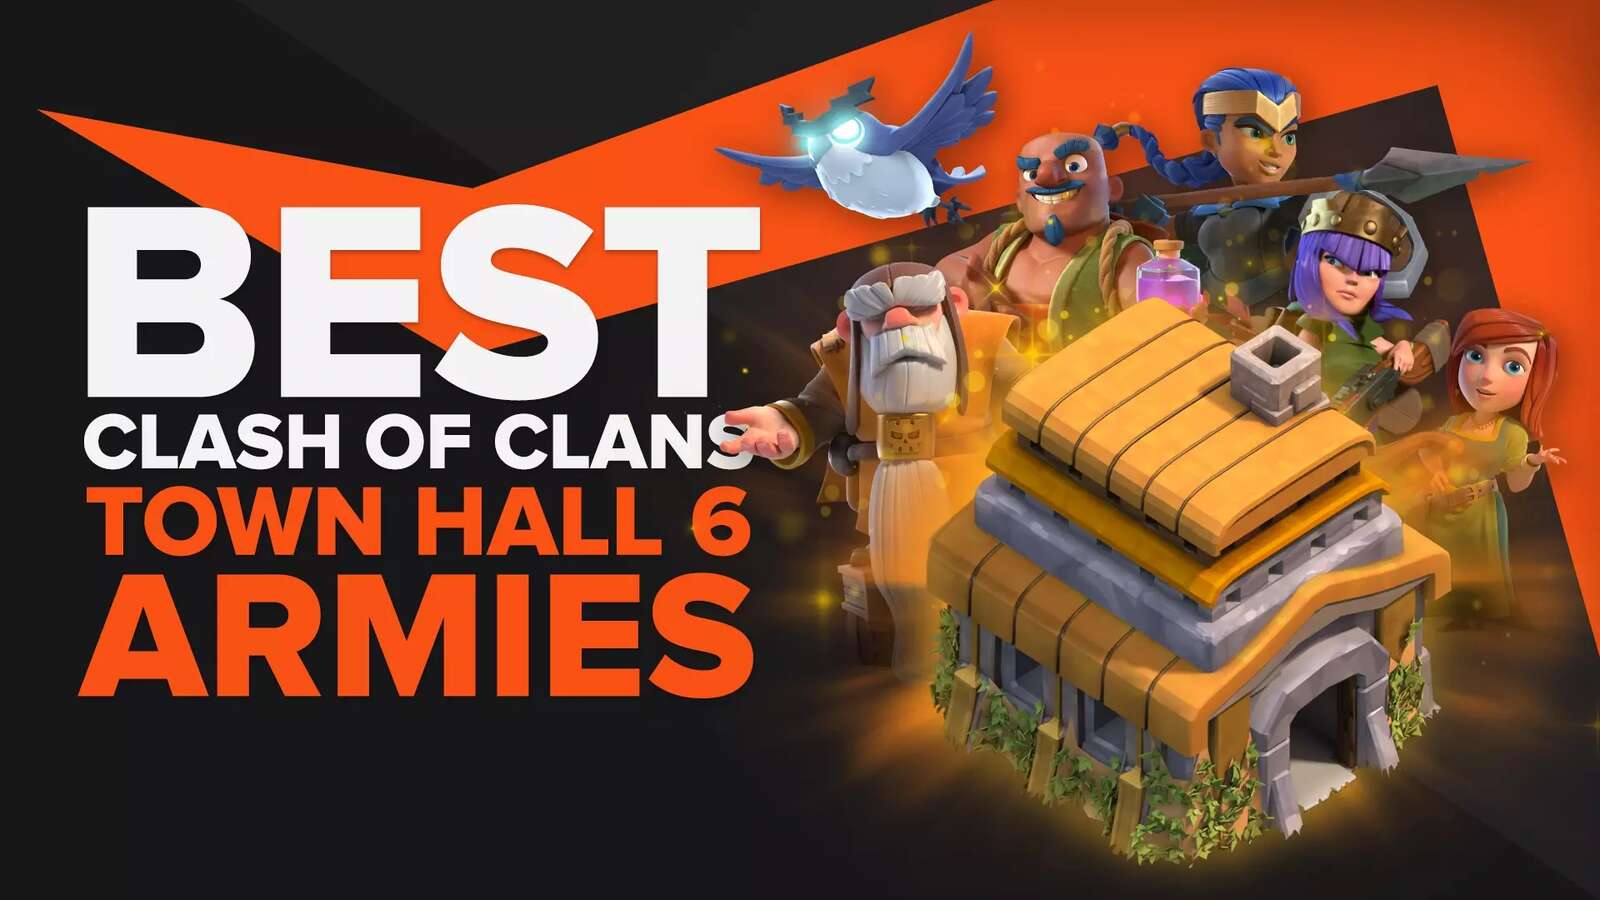 The Best Armies For Town Hall 6 In Clash of Clans